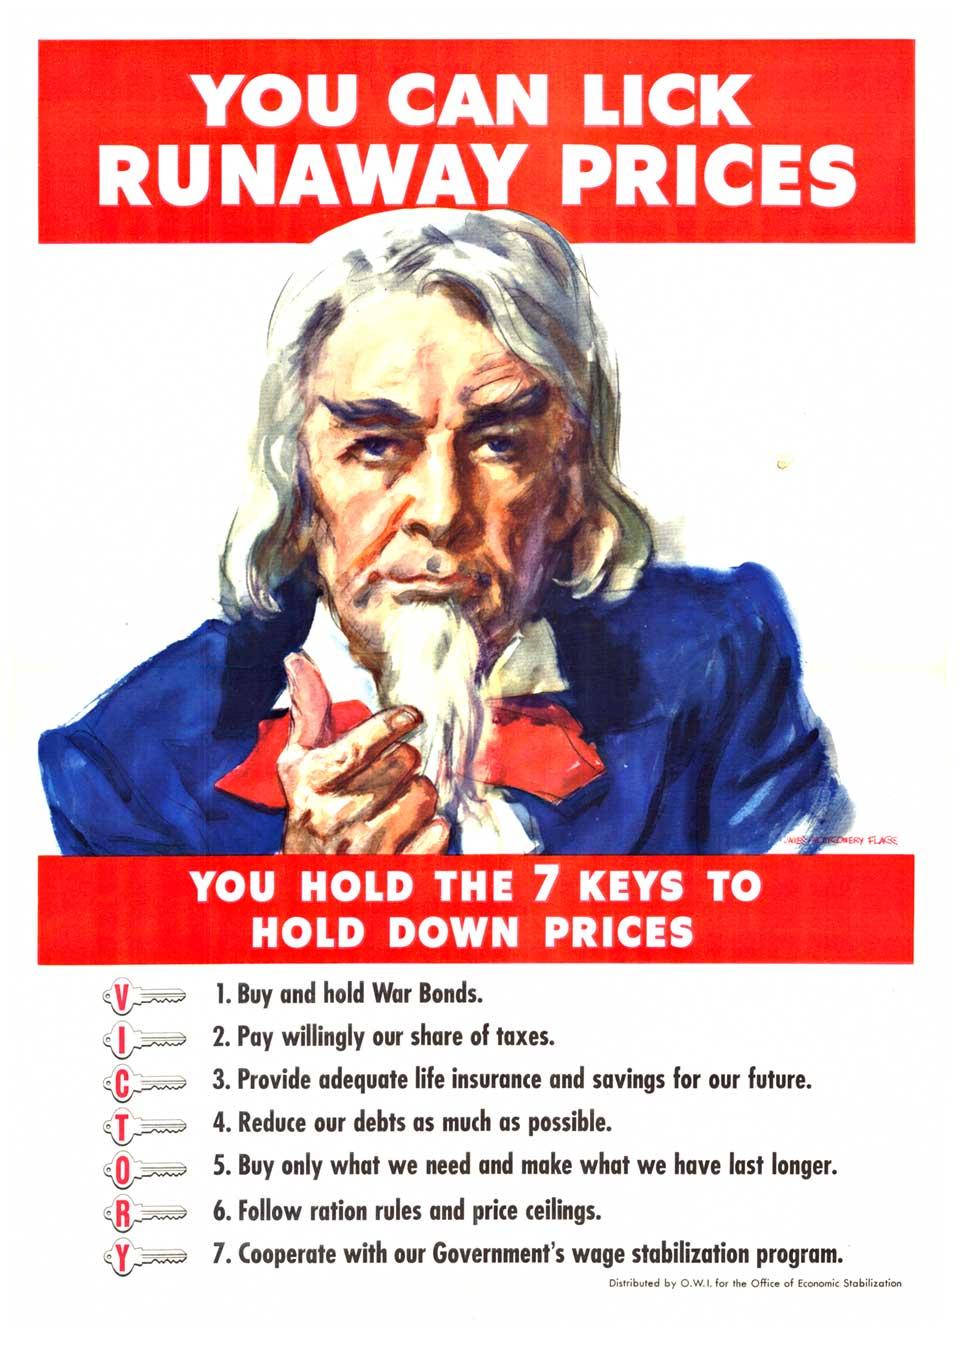 James Montgomery Flagg Portrait Print - Original "You Can Lick Runaway Prices, You Hol The 7 Kesys to Hold Down Prices" 